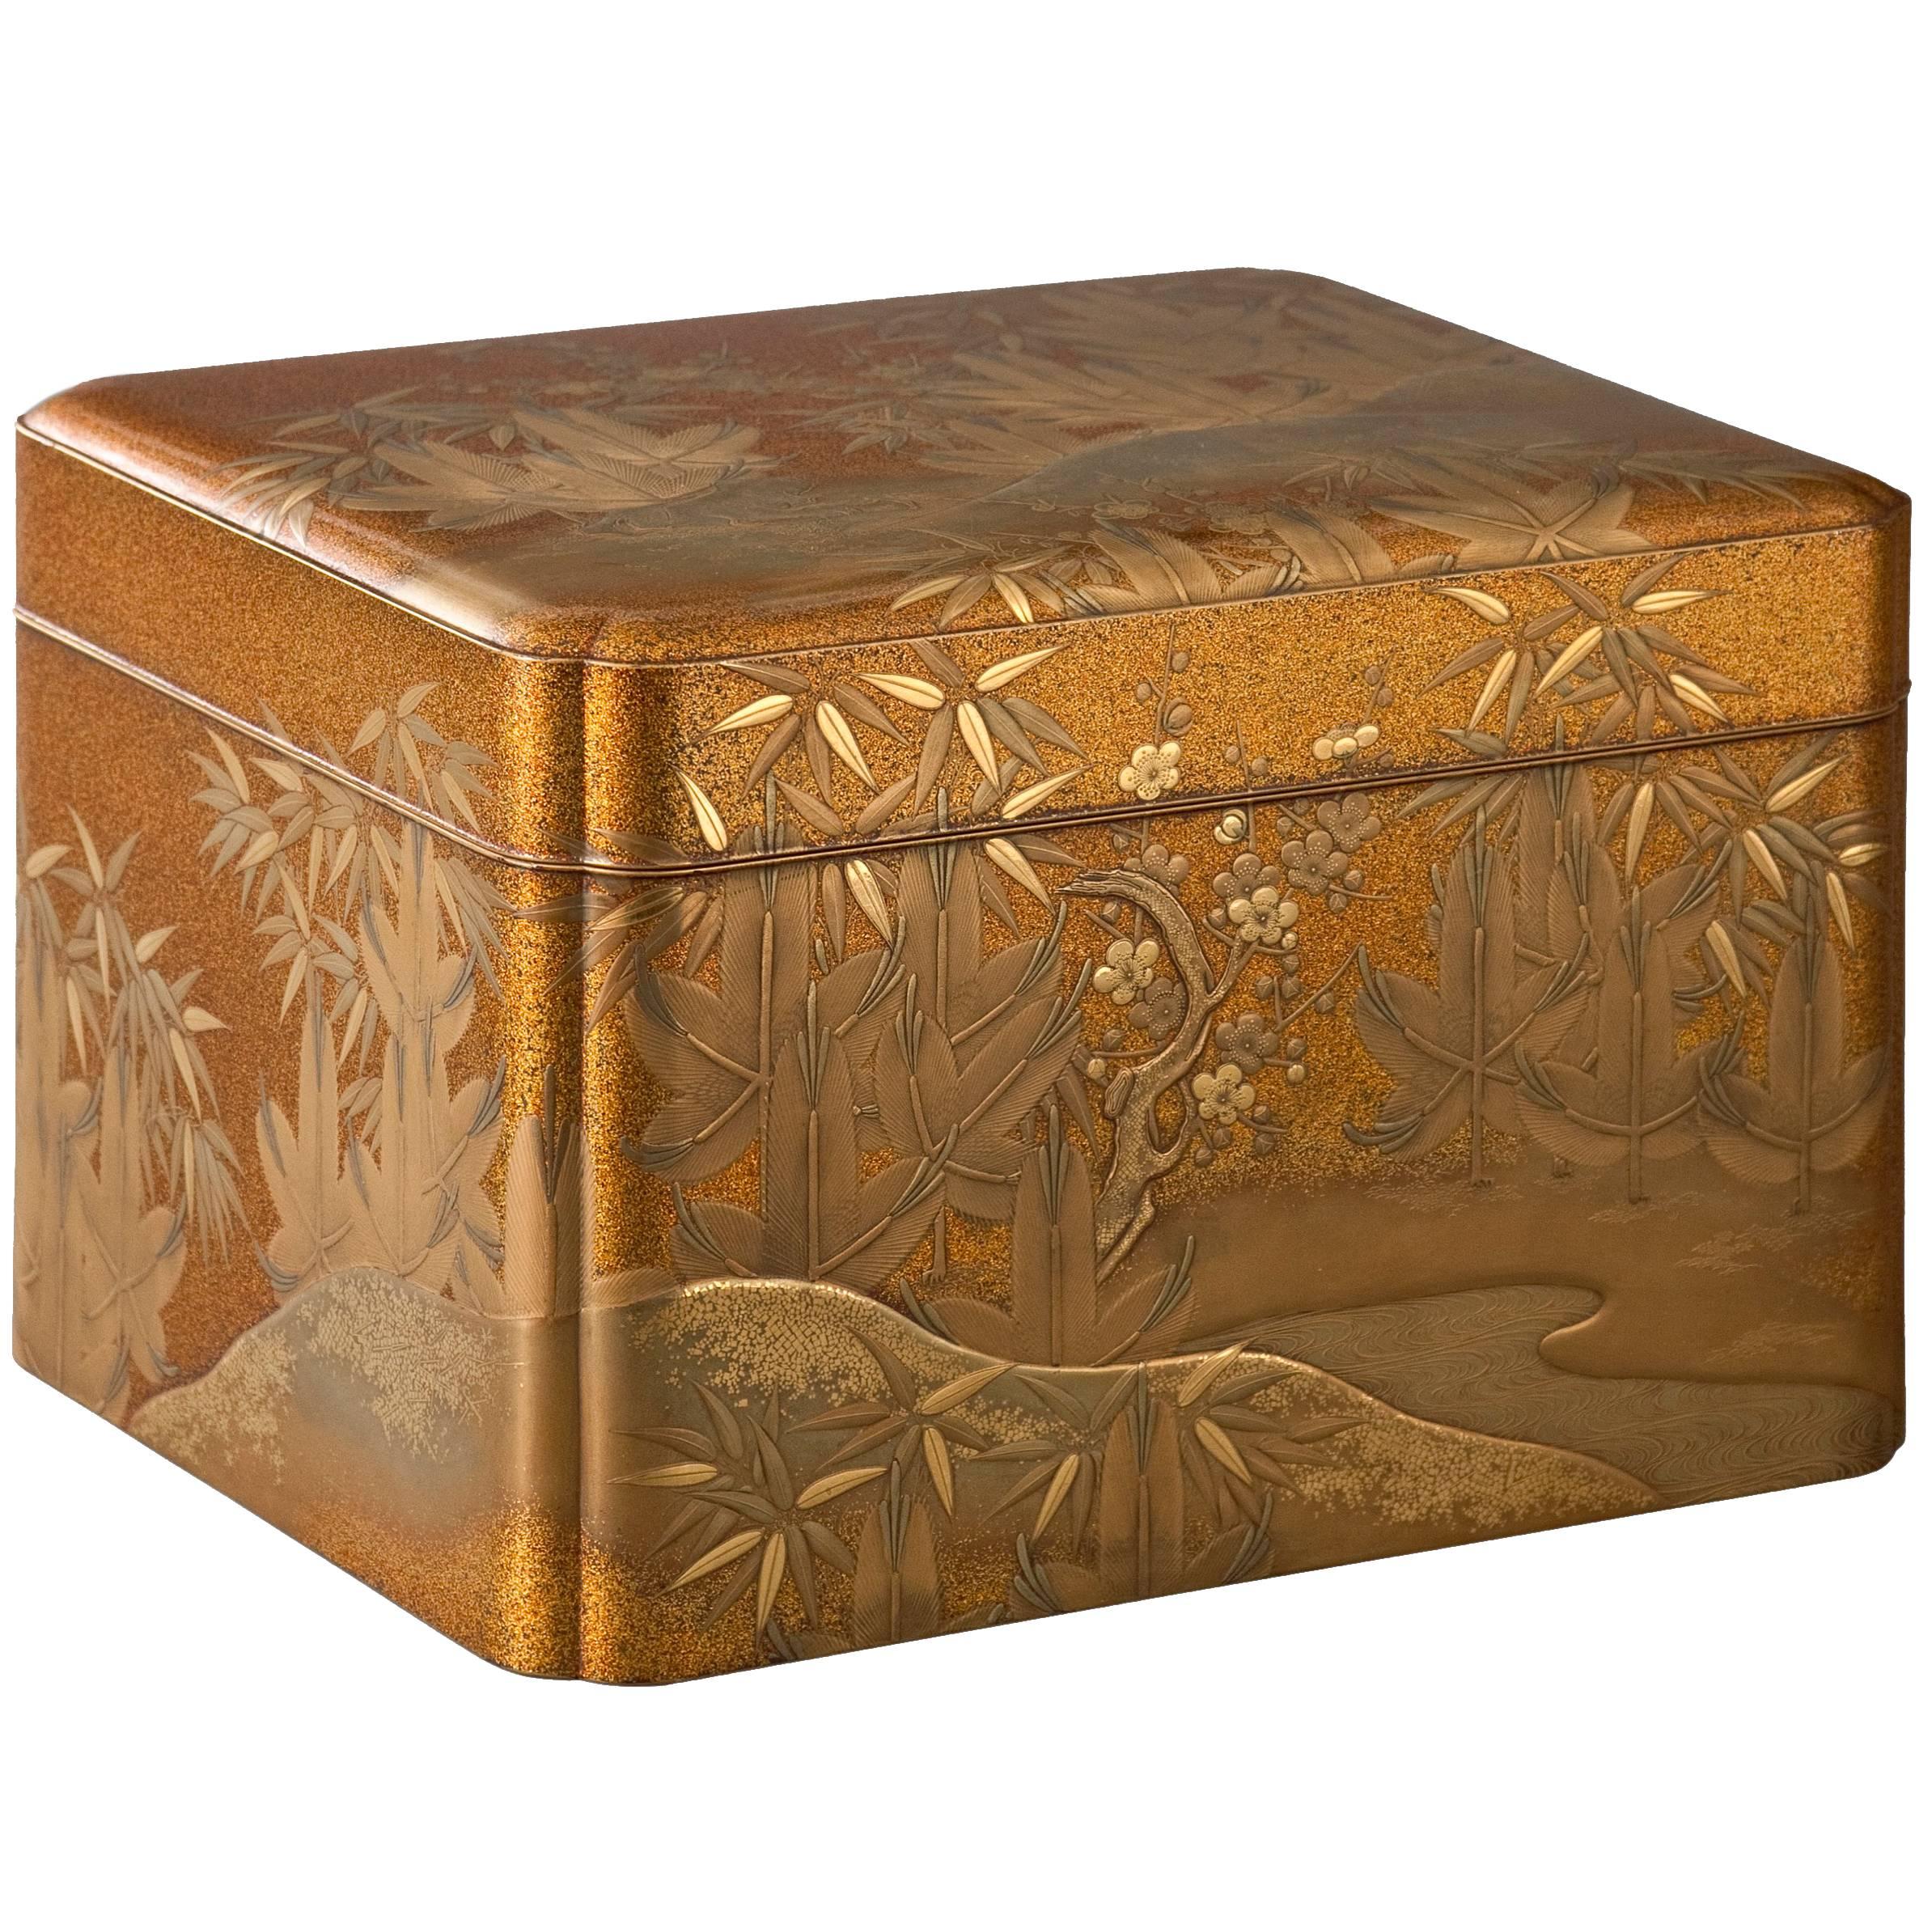 A Japanese Gold Lacquer Friends of Winter Box with Interior Tray